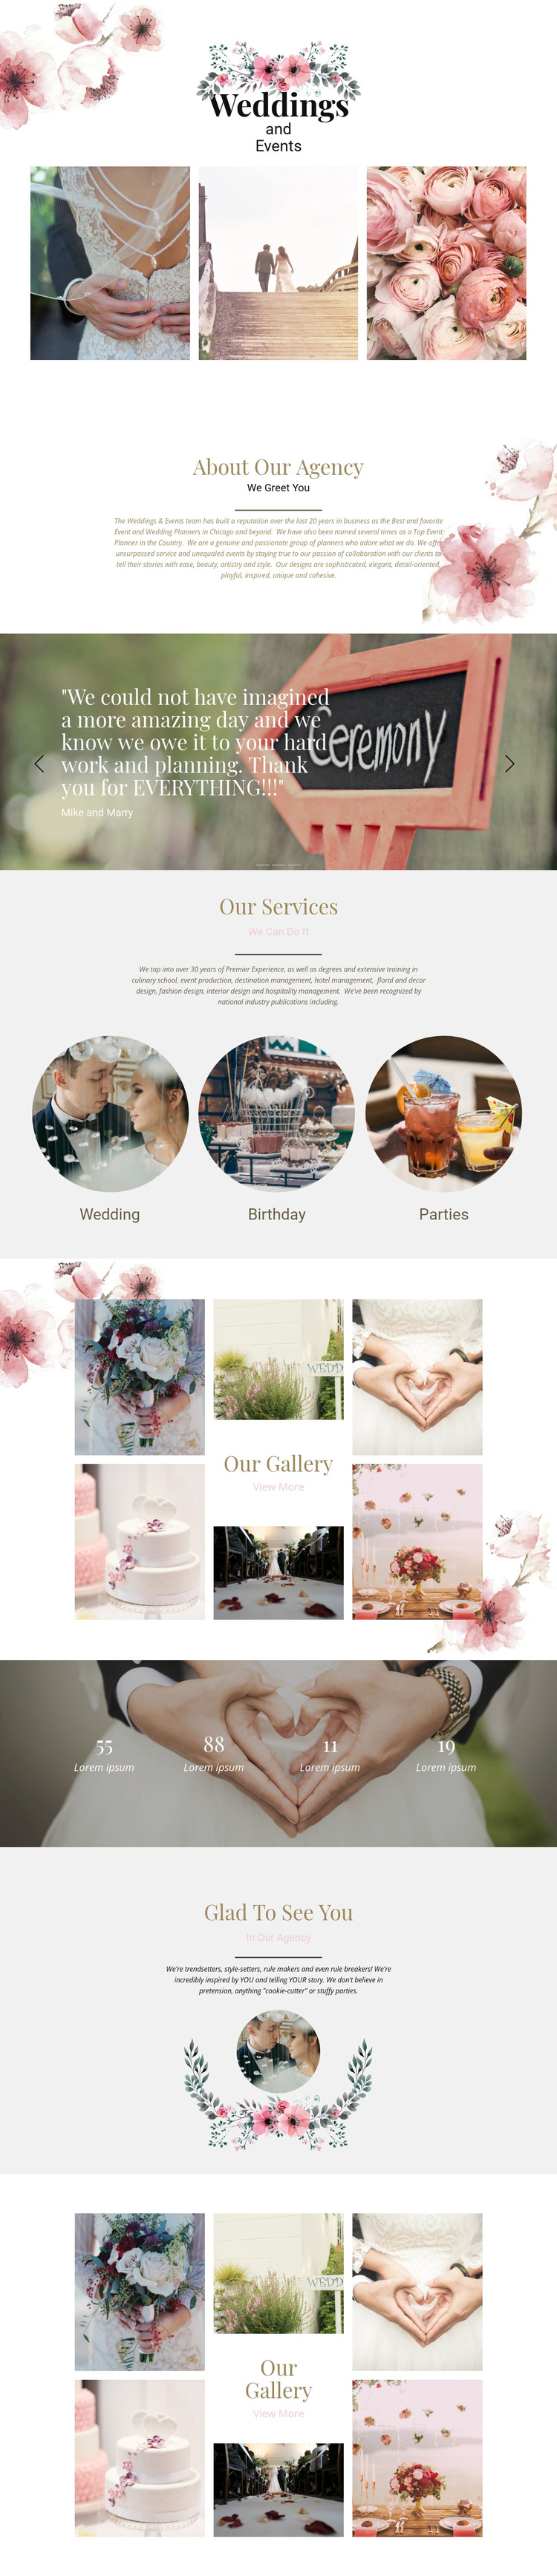 Moments of wedding HTML5 Template